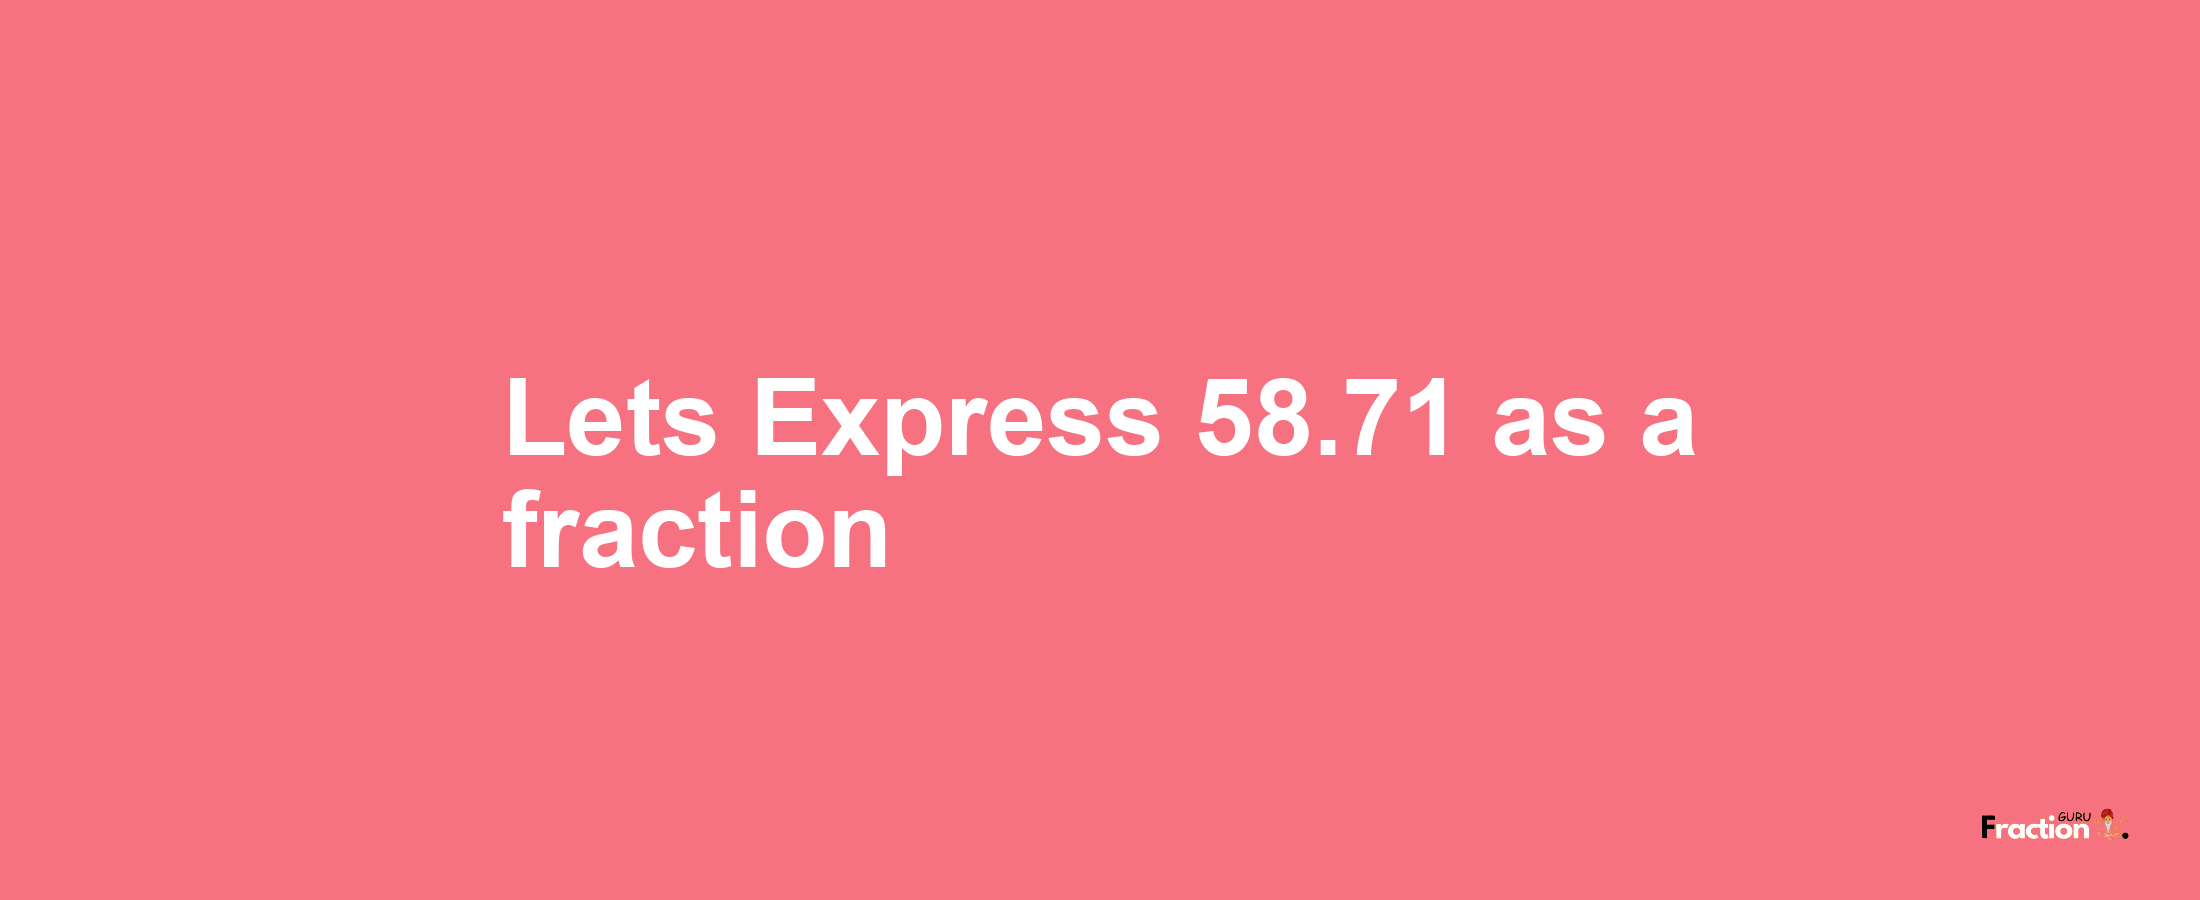 Lets Express 58.71 as afraction